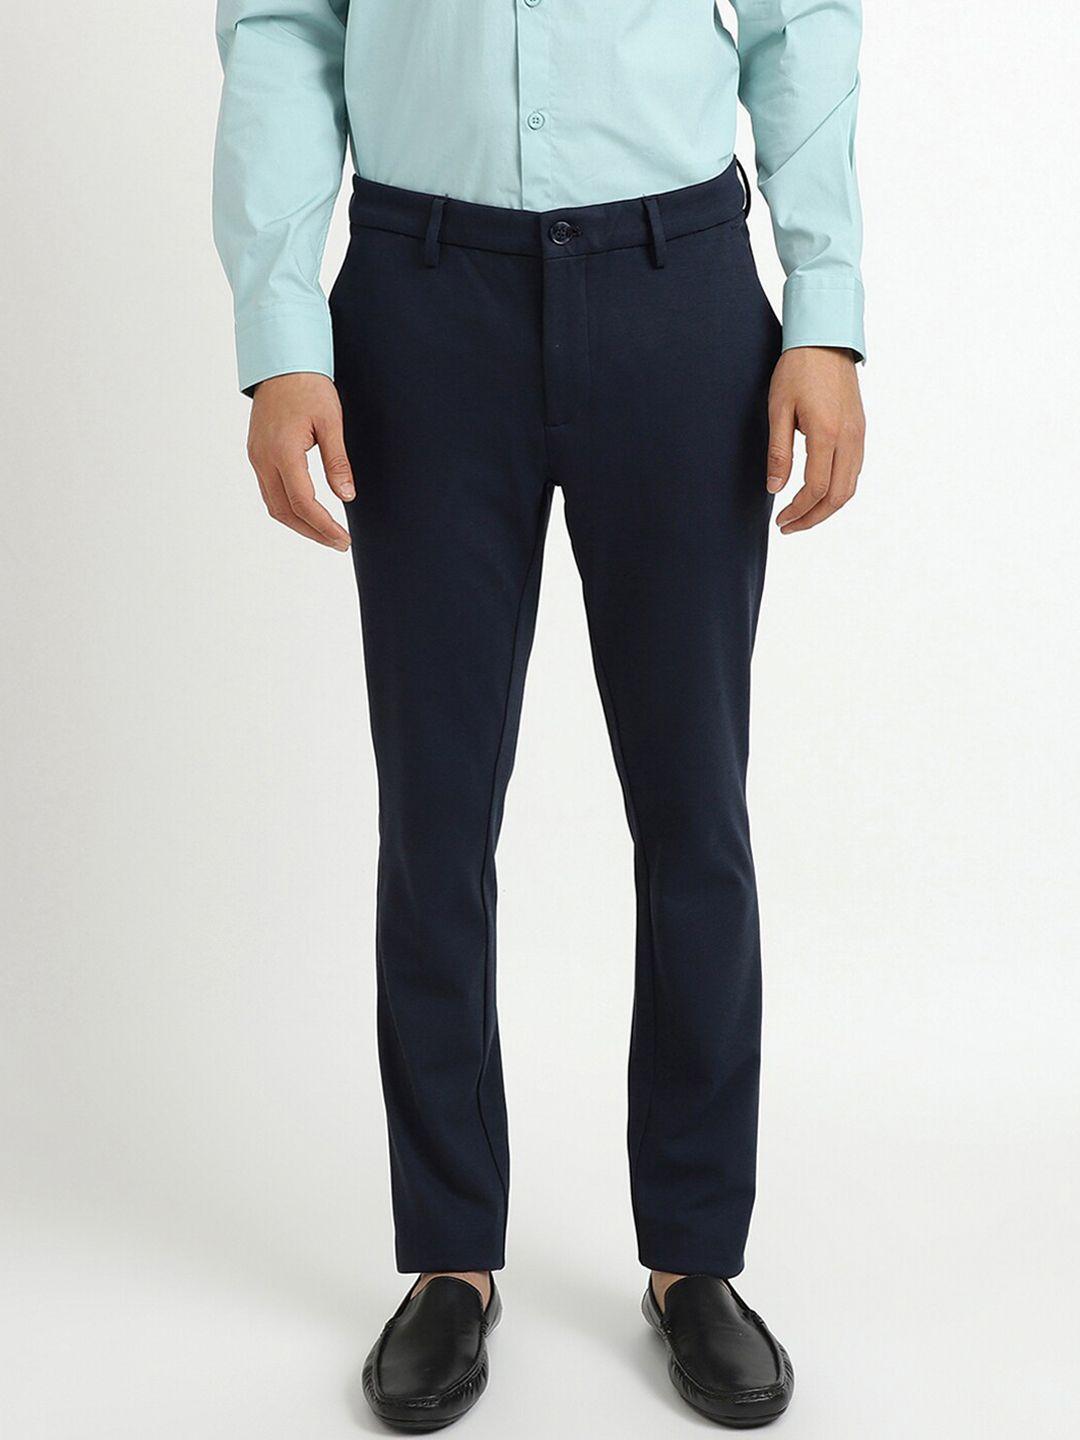 united-colors-of-benetton-men-navy-blue-cotton-solid-slim-fit-trousers